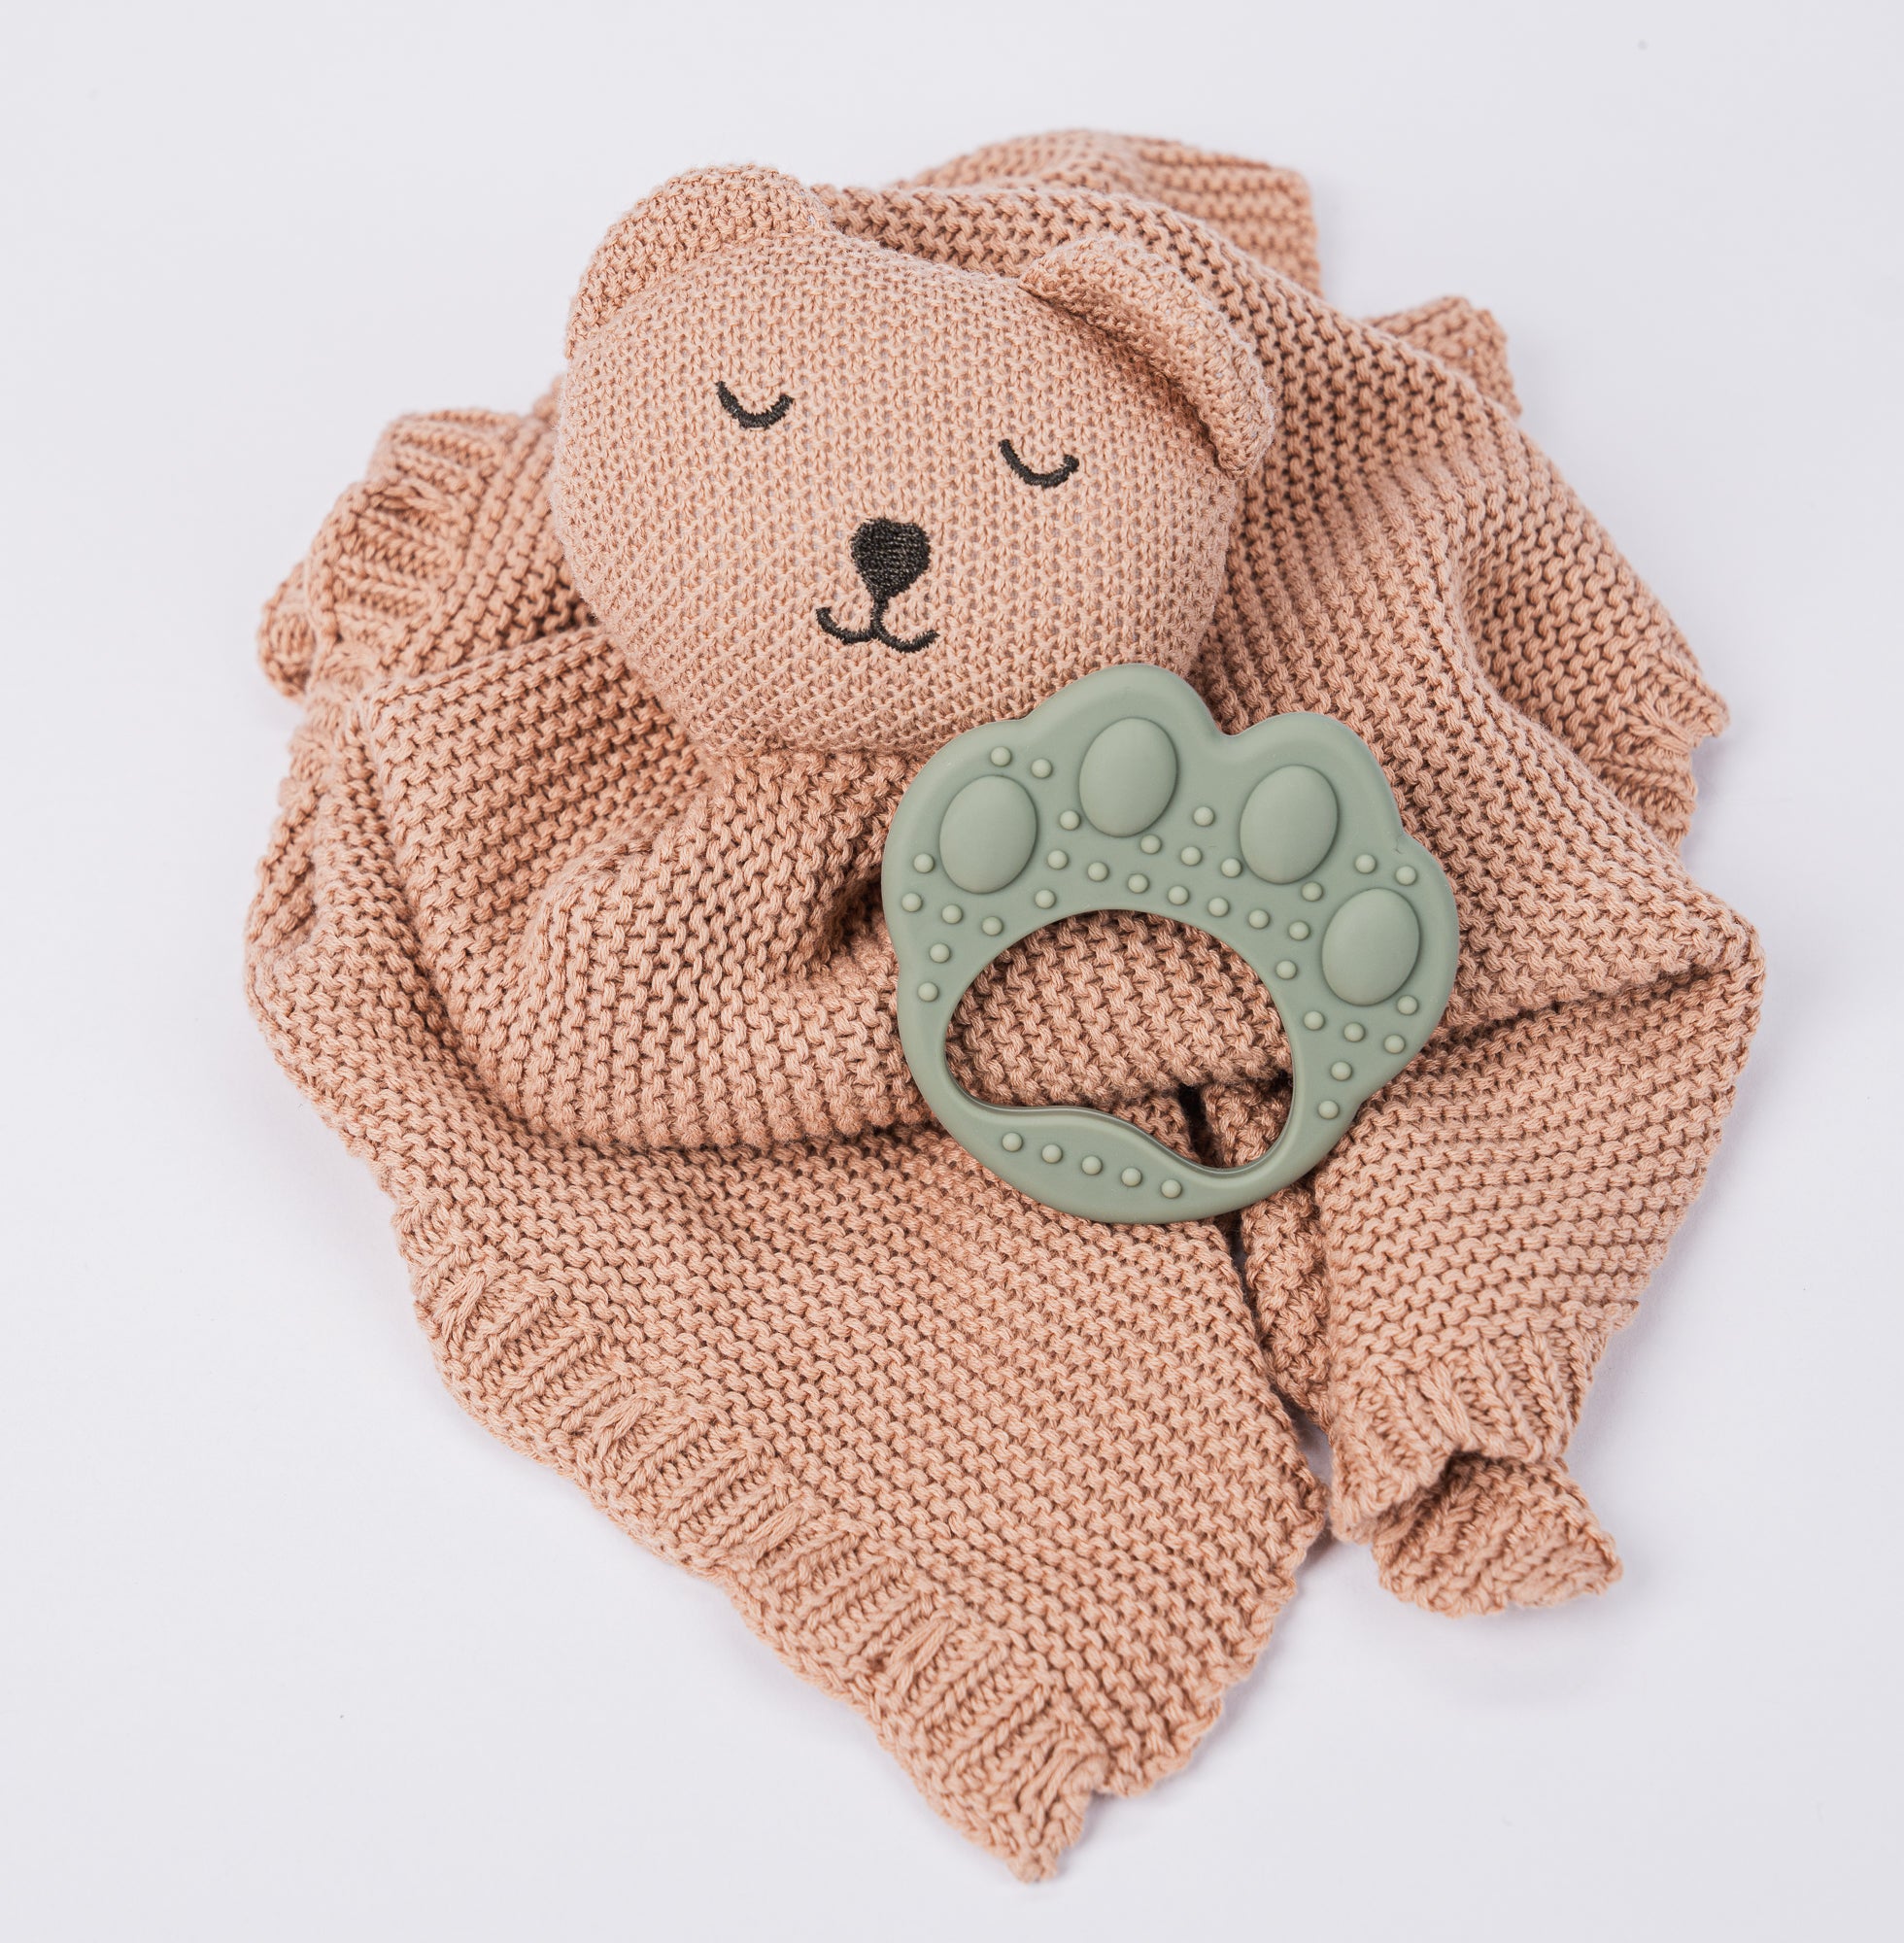 Baby Bliss Bear Teething Toy